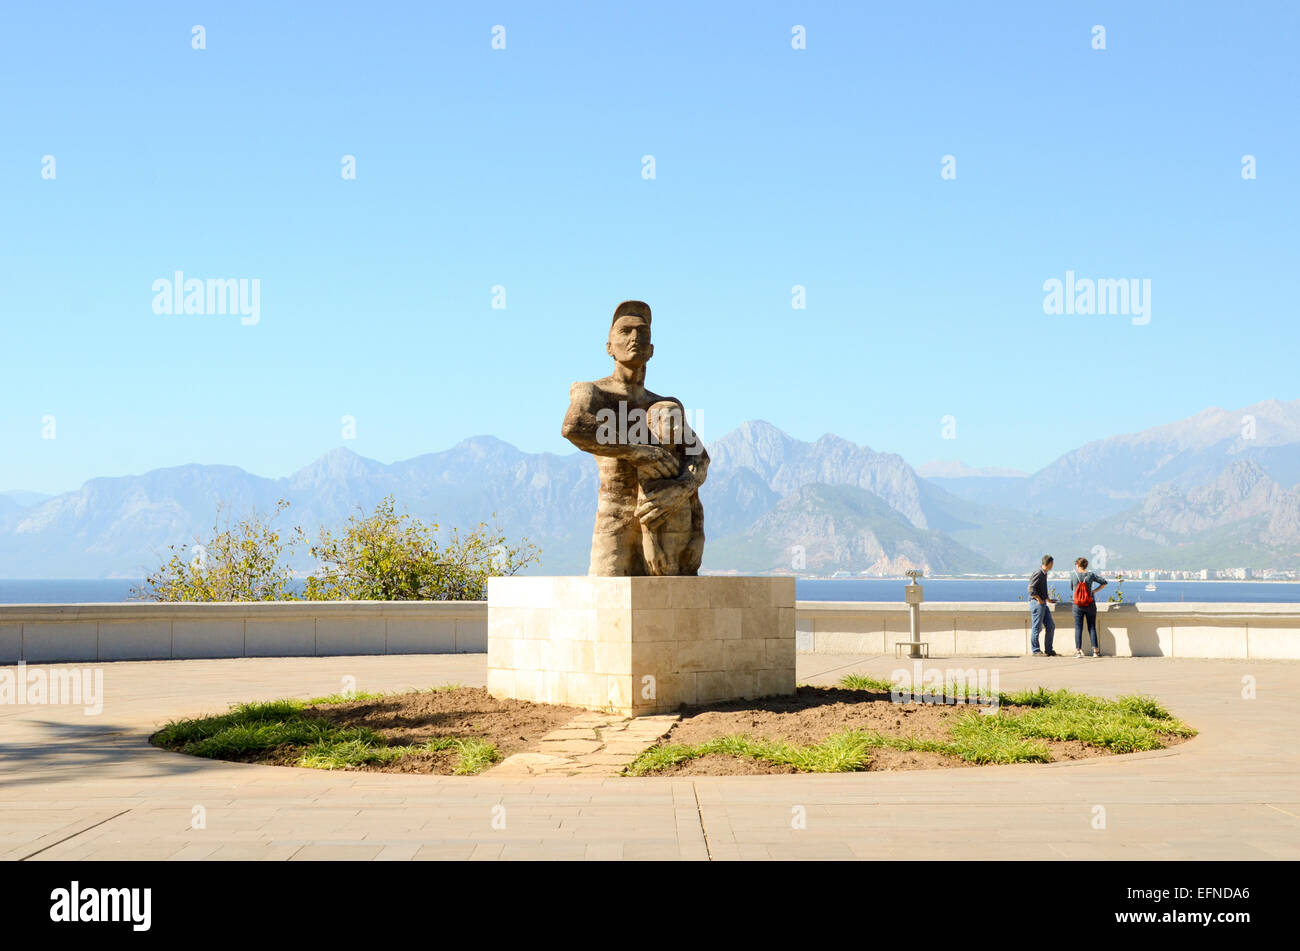 Statue of man protecting child, in public square with view of sea and mountains, Antalya, Turkey Stock Photo